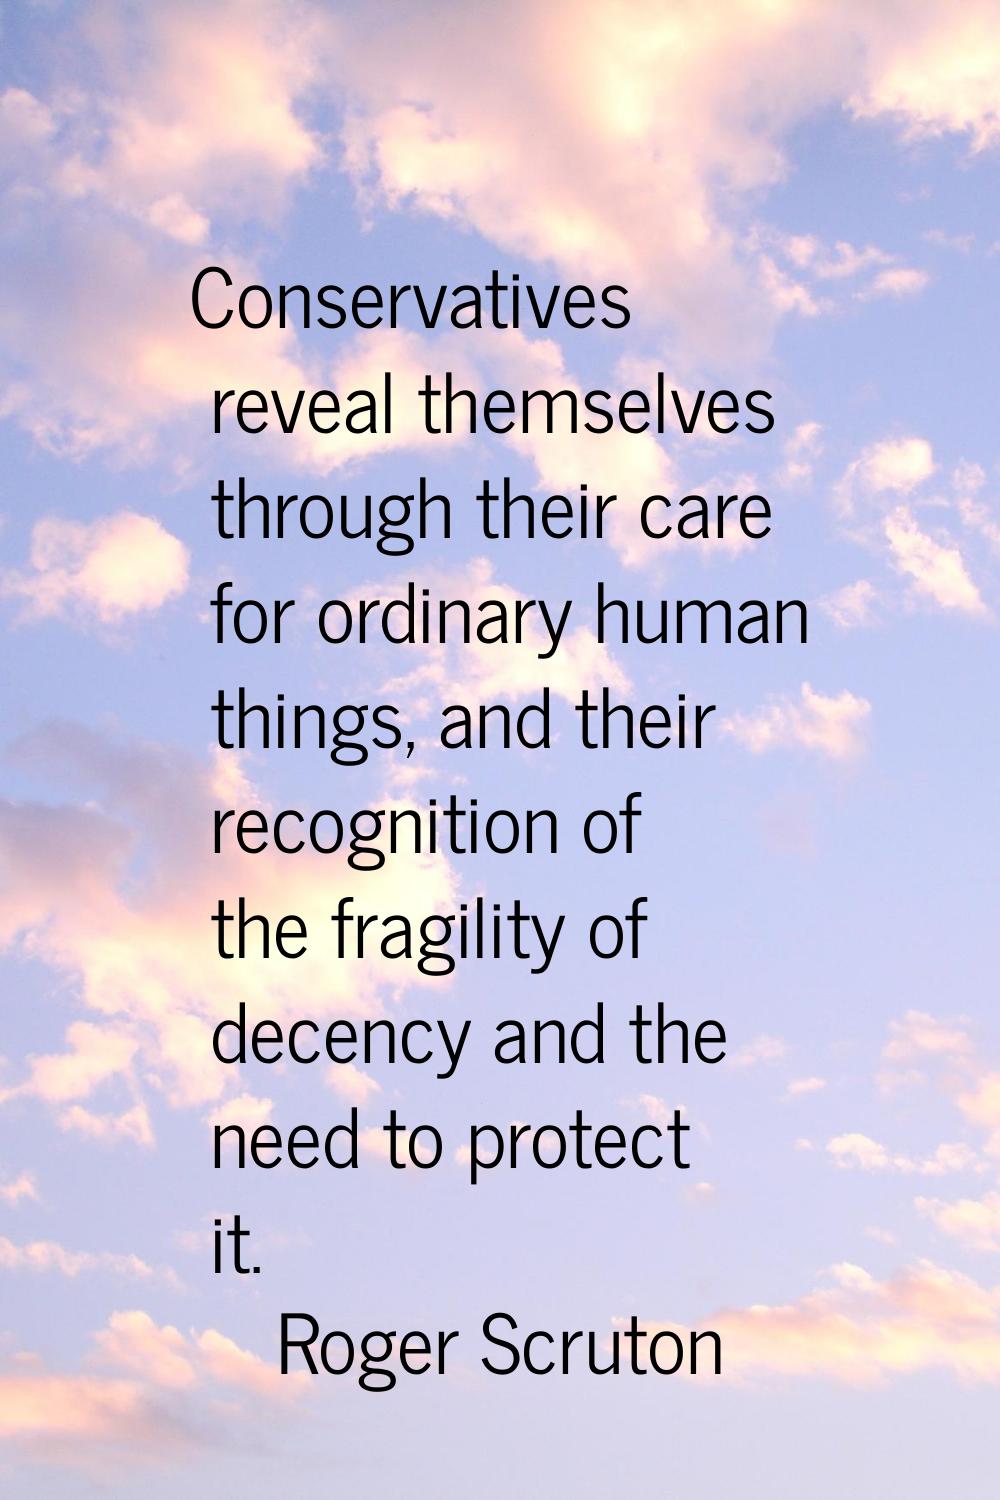 Conservatives reveal themselves through their care for ordinary human things, and their recognition